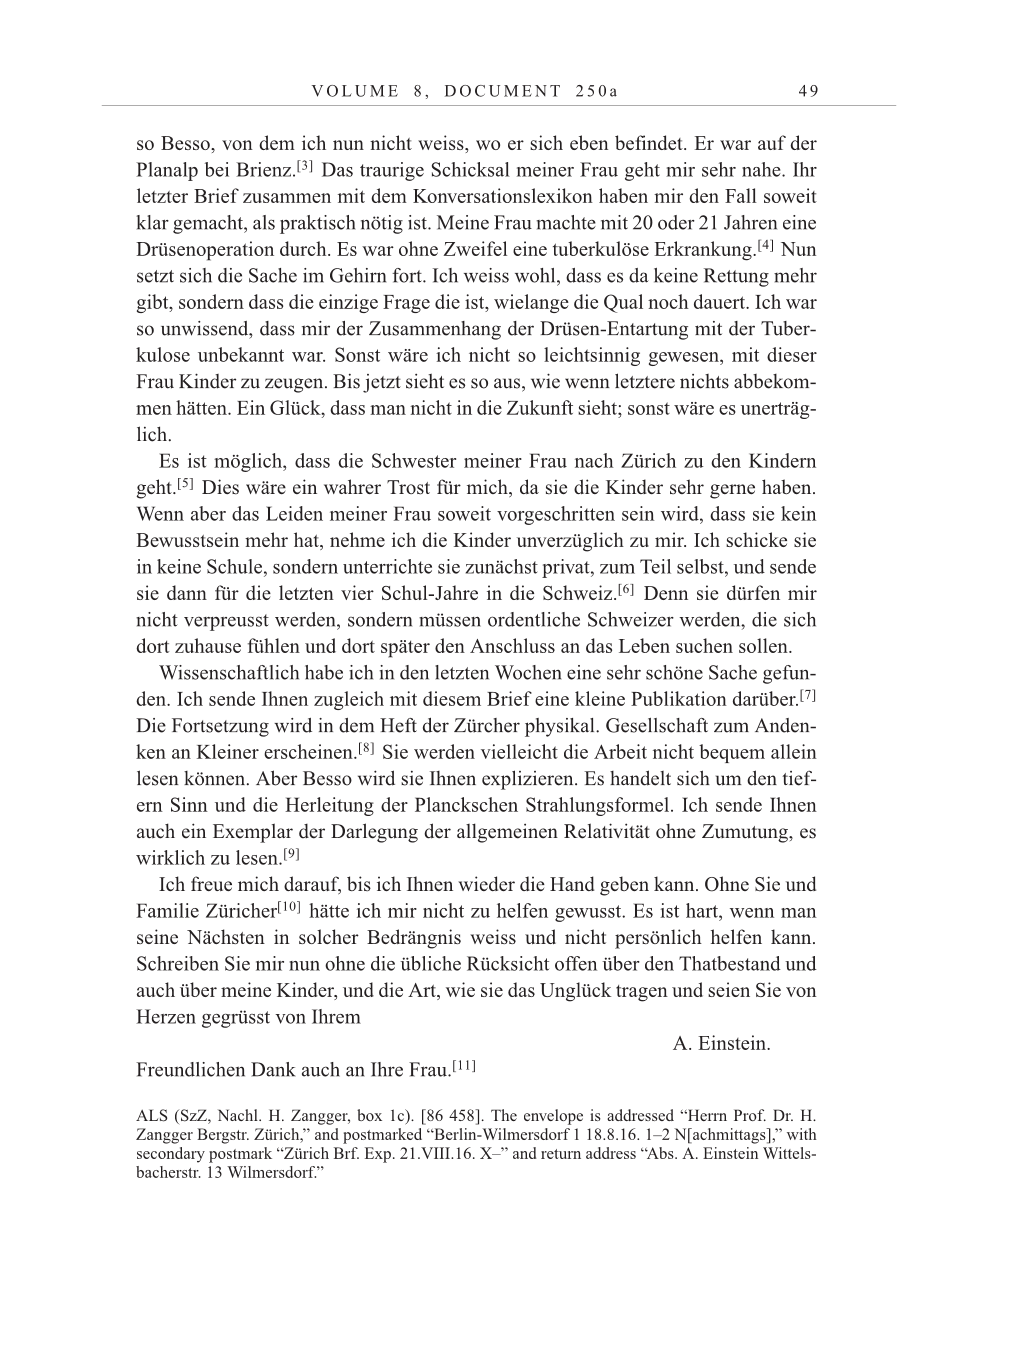 Volume 10: The Berlin Years: Correspondence May-December 1920 / Supplementary Correspondence 1909-1920 page 49